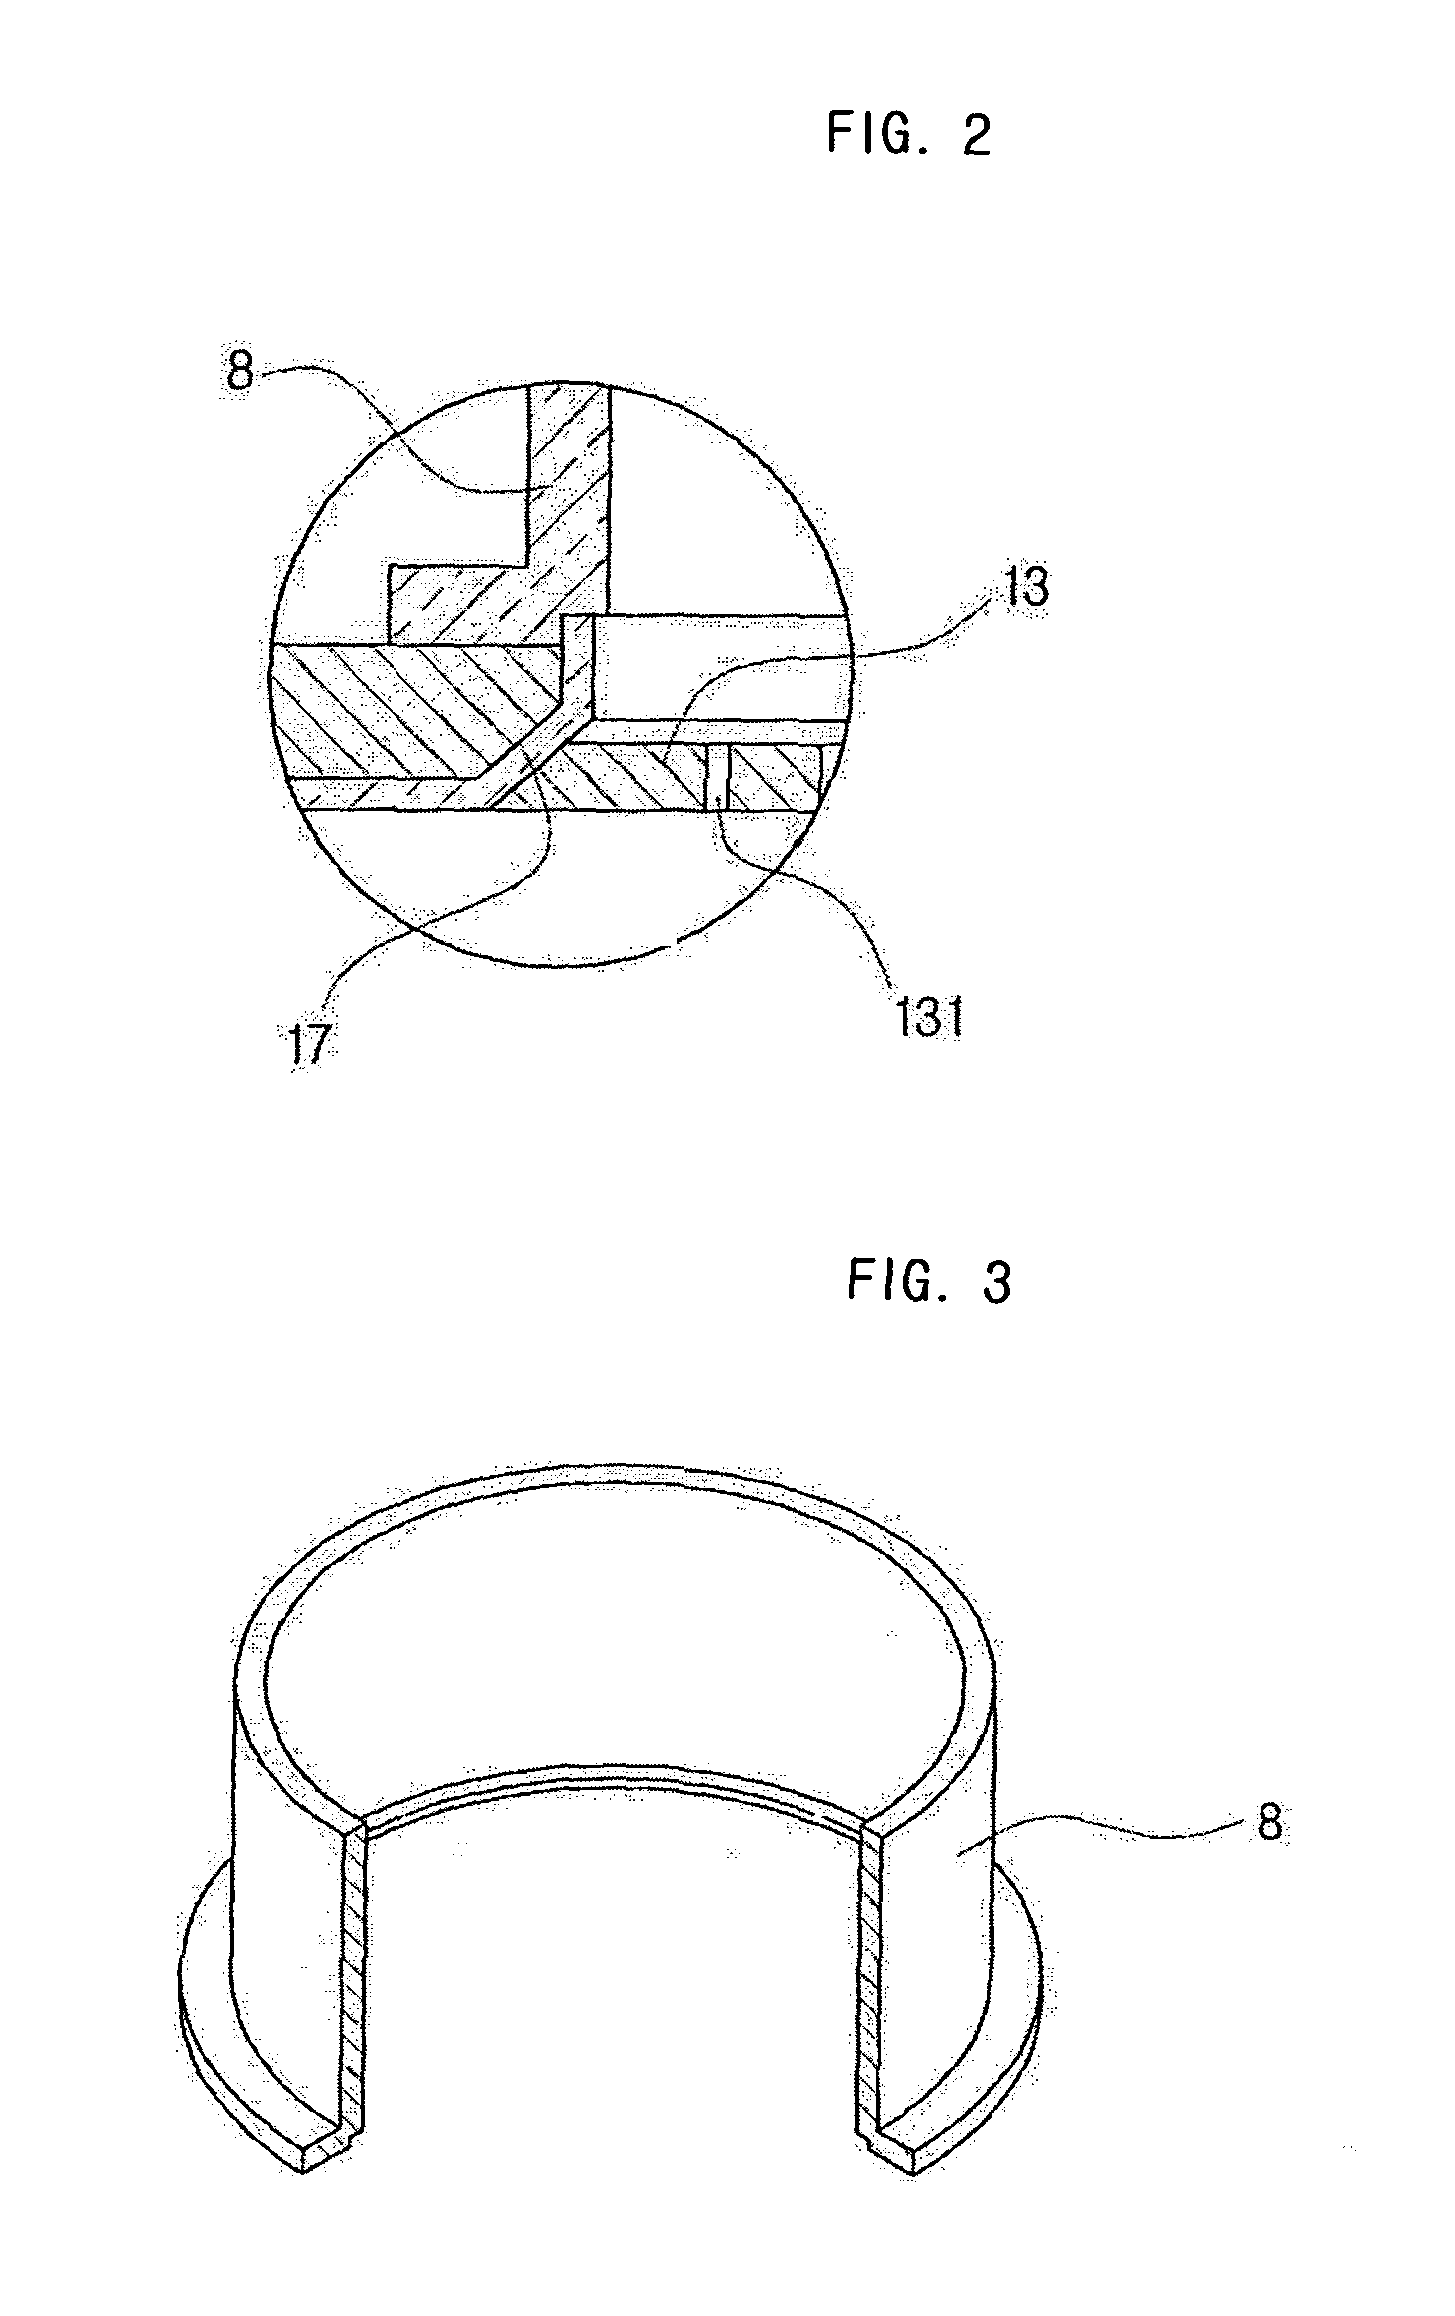 Apparatus for surface-treating wafer using high-frequency inductively-coupled plasma